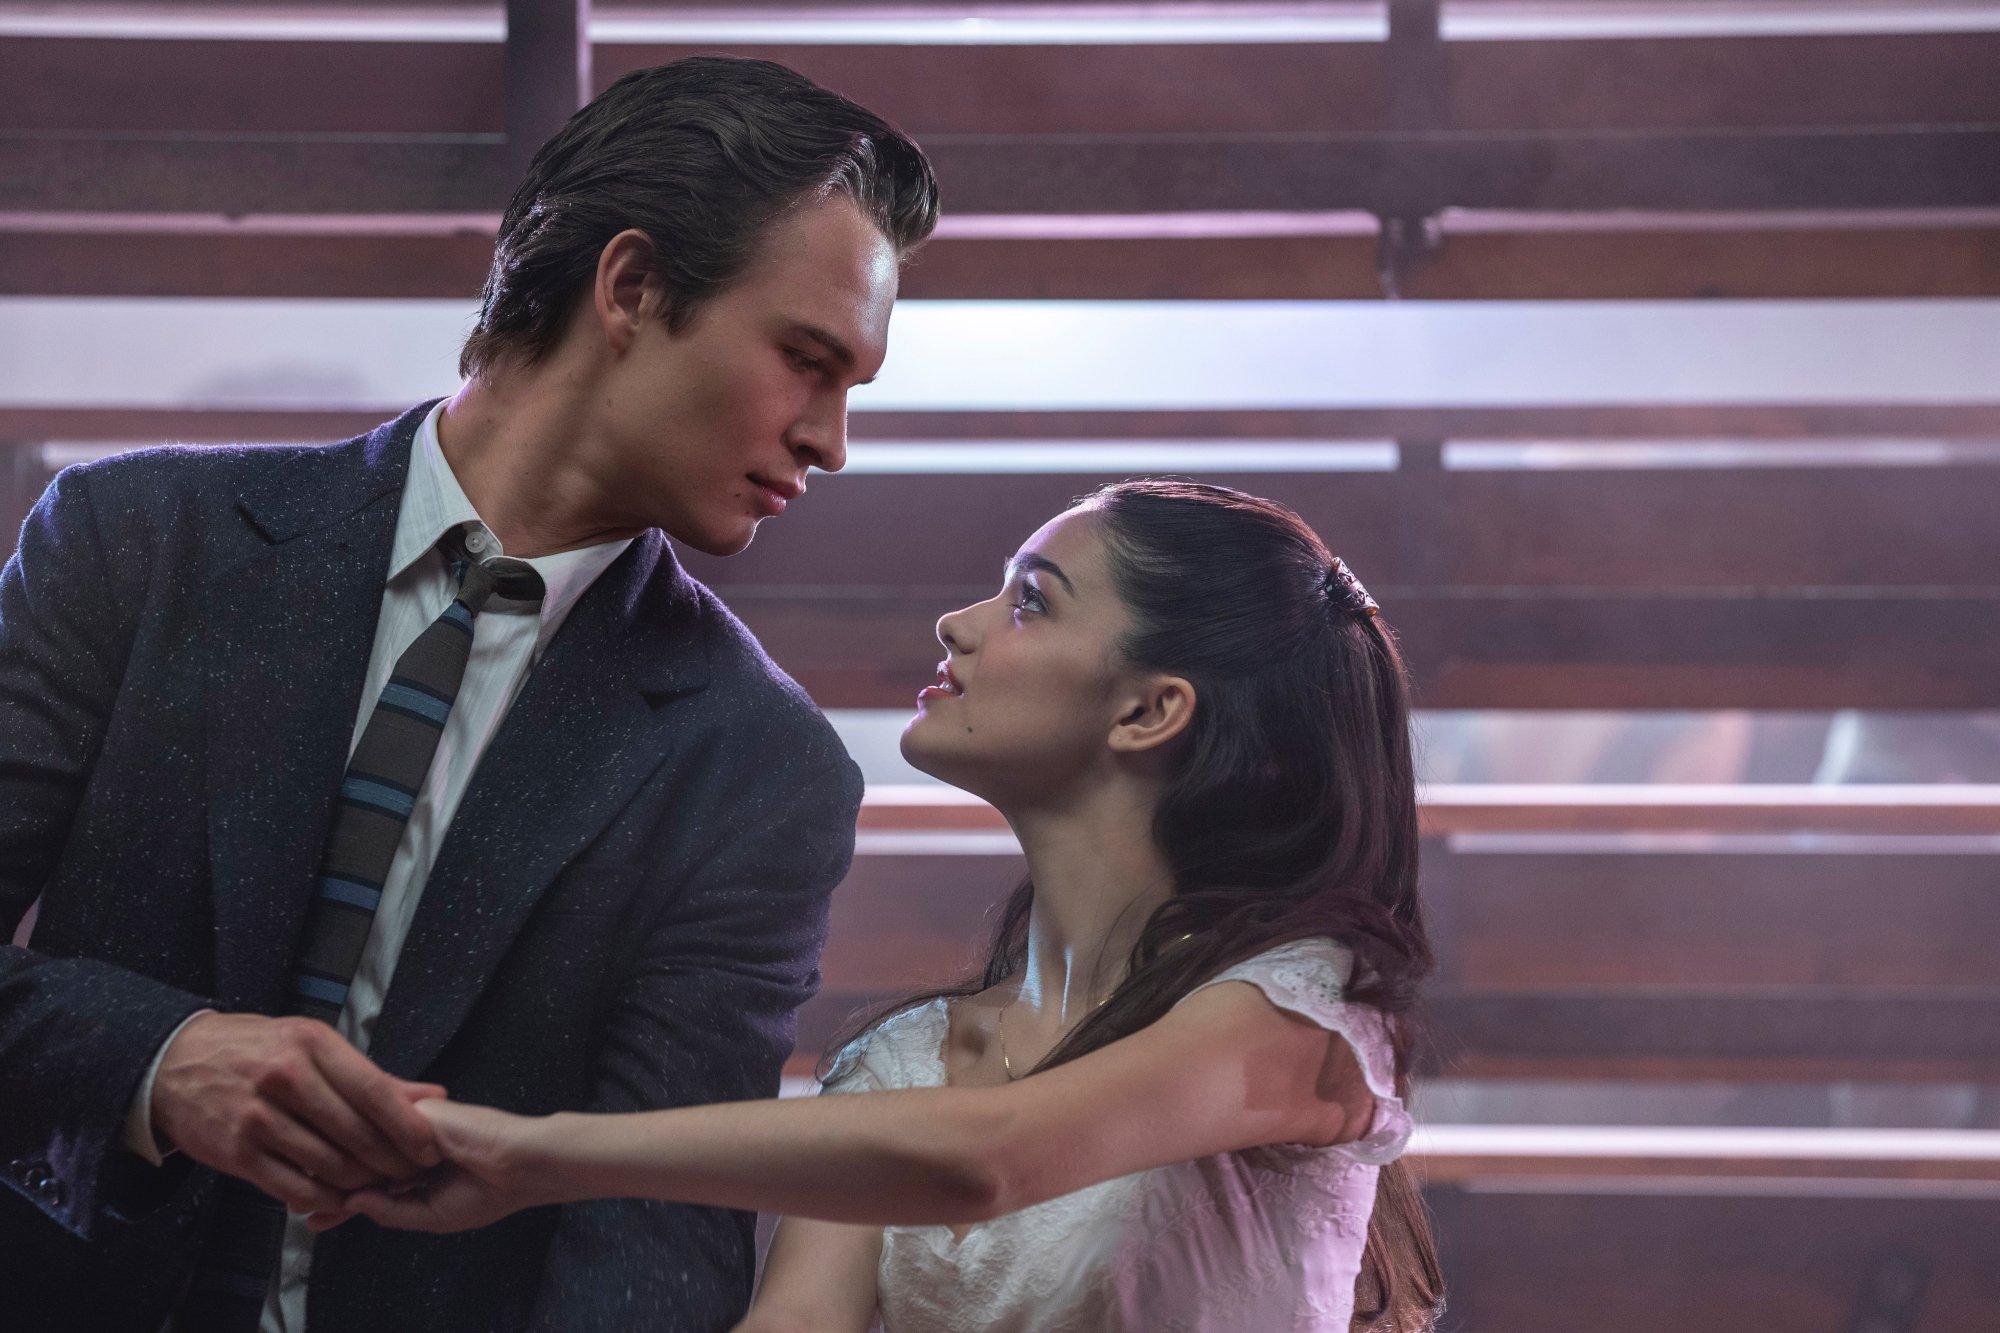 'West Side Story' movie review Ansel Elgort as Tony and Rachel Zegler as Maria holding hands under the bleachers